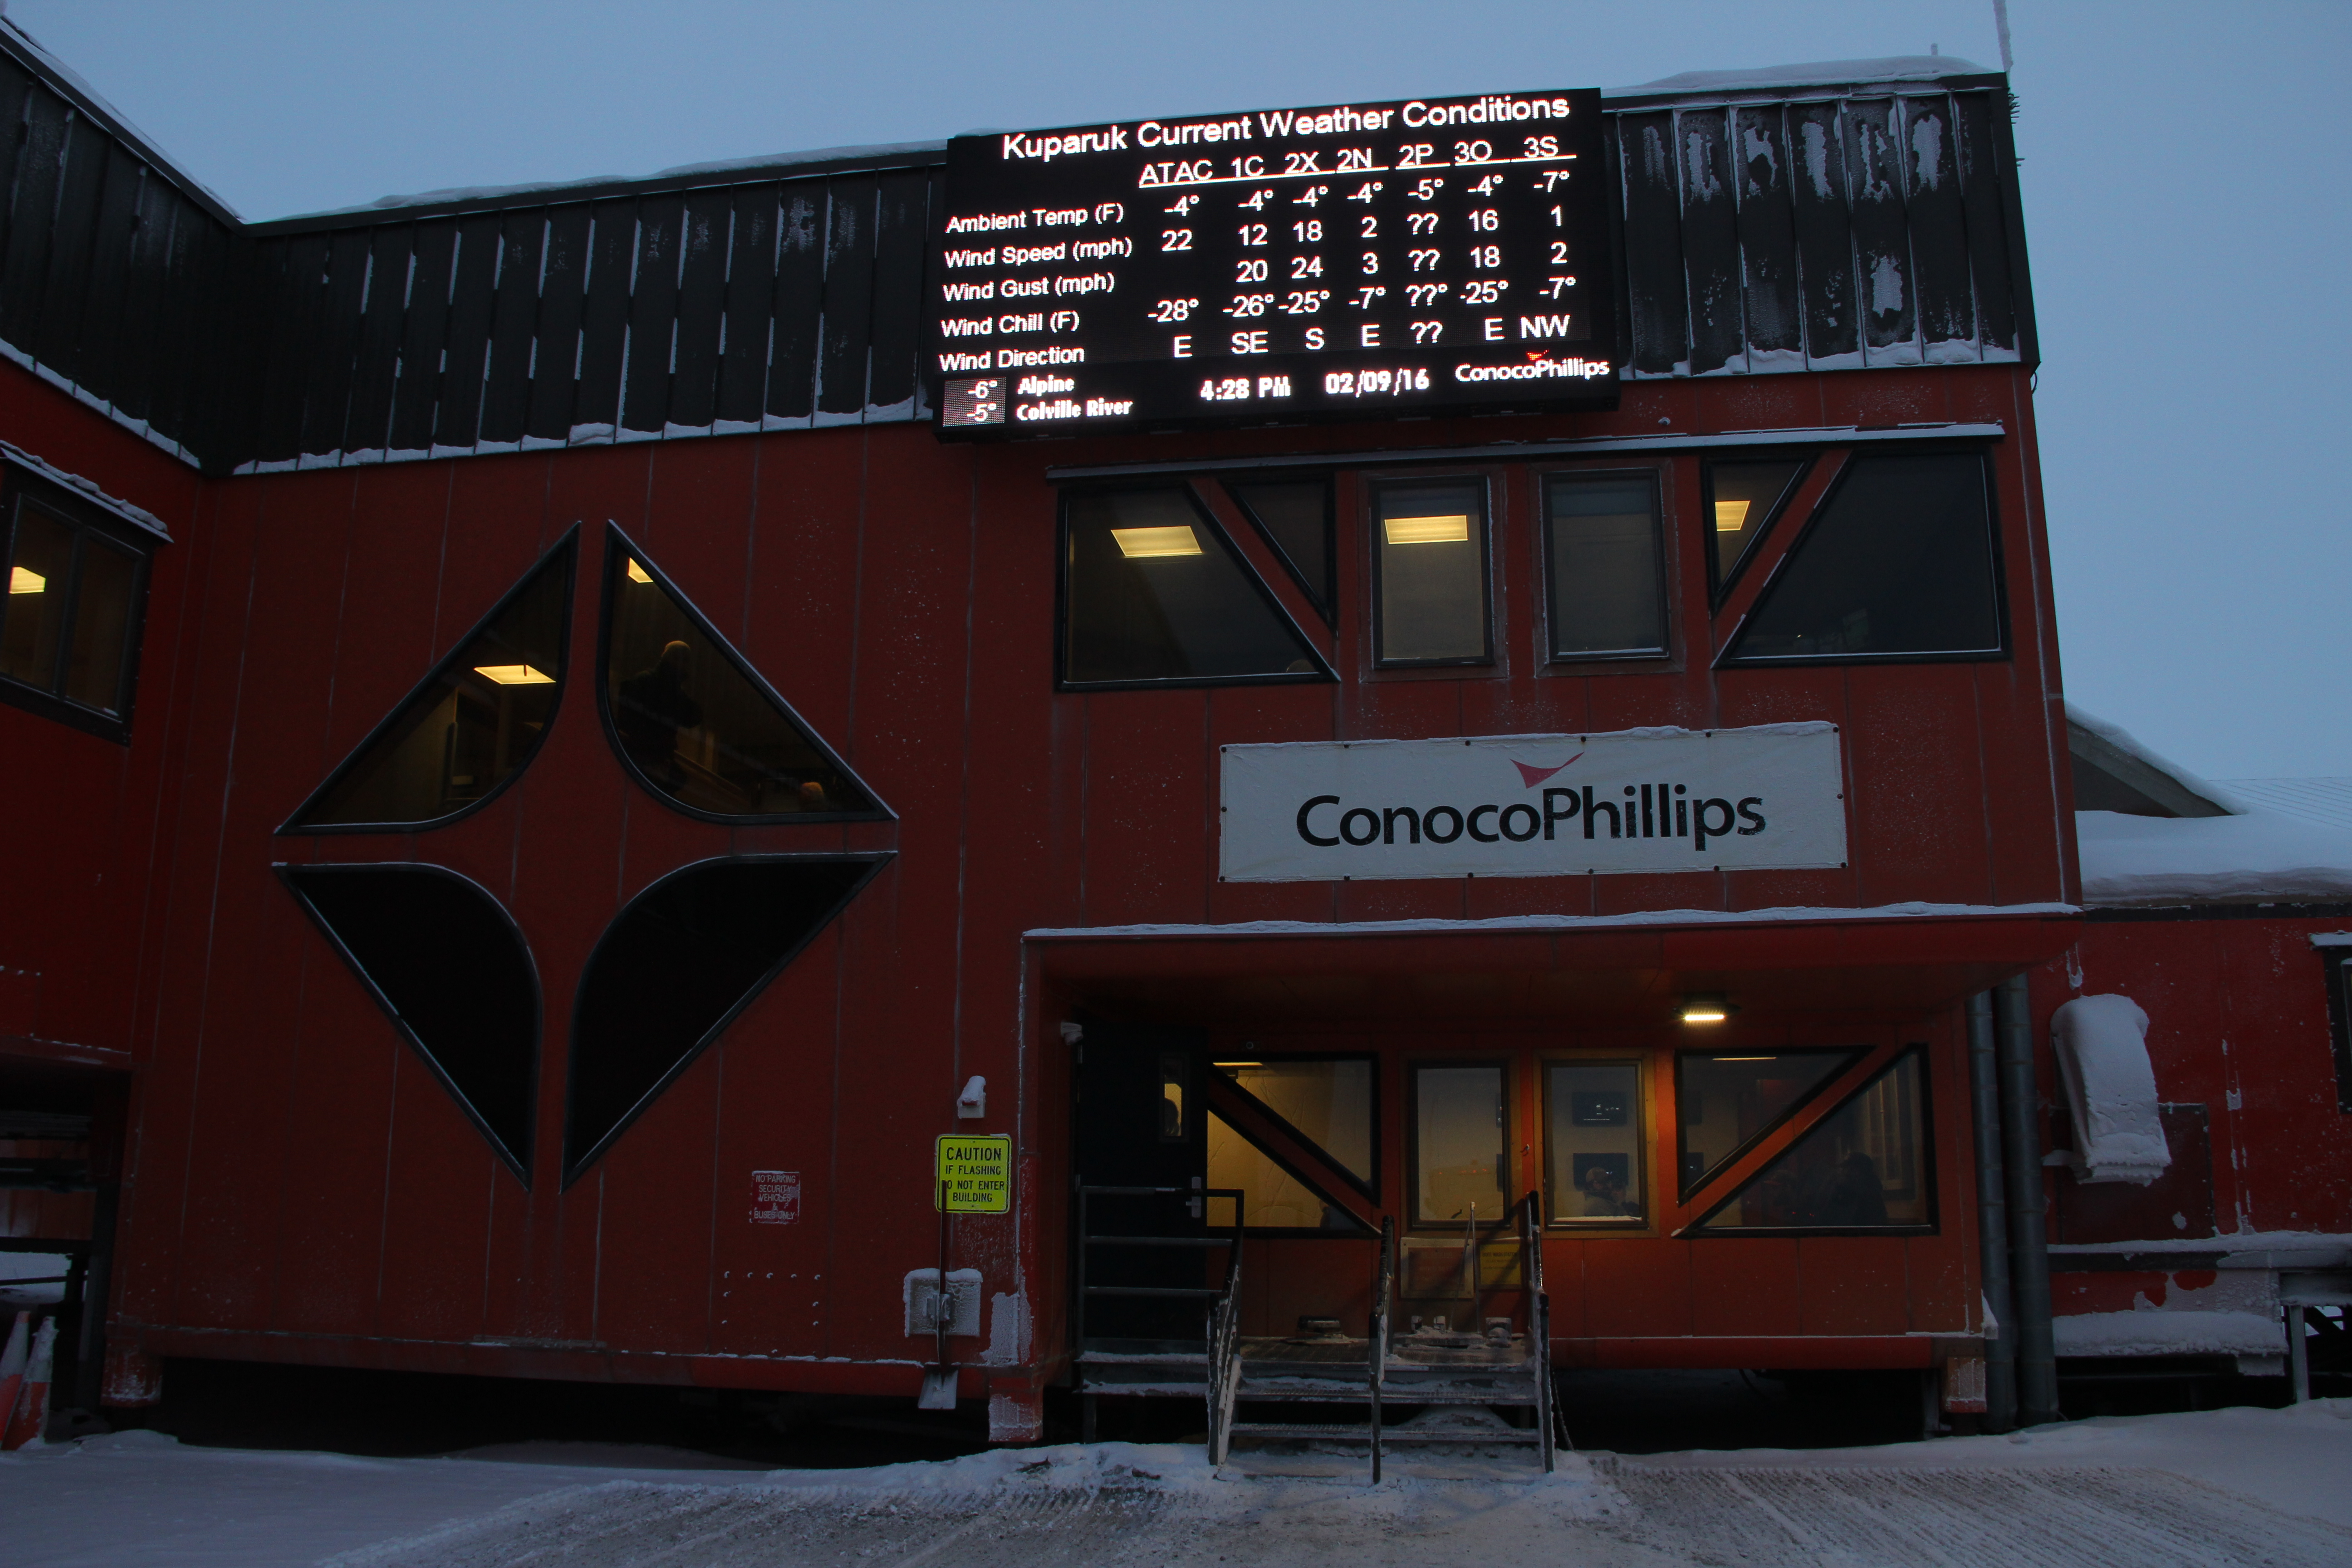 Arriving at ConocoPhillips Kuparuk River Unit, the temperature hovered around -7 degrees. Photo: Rachel Waldholz/APRN